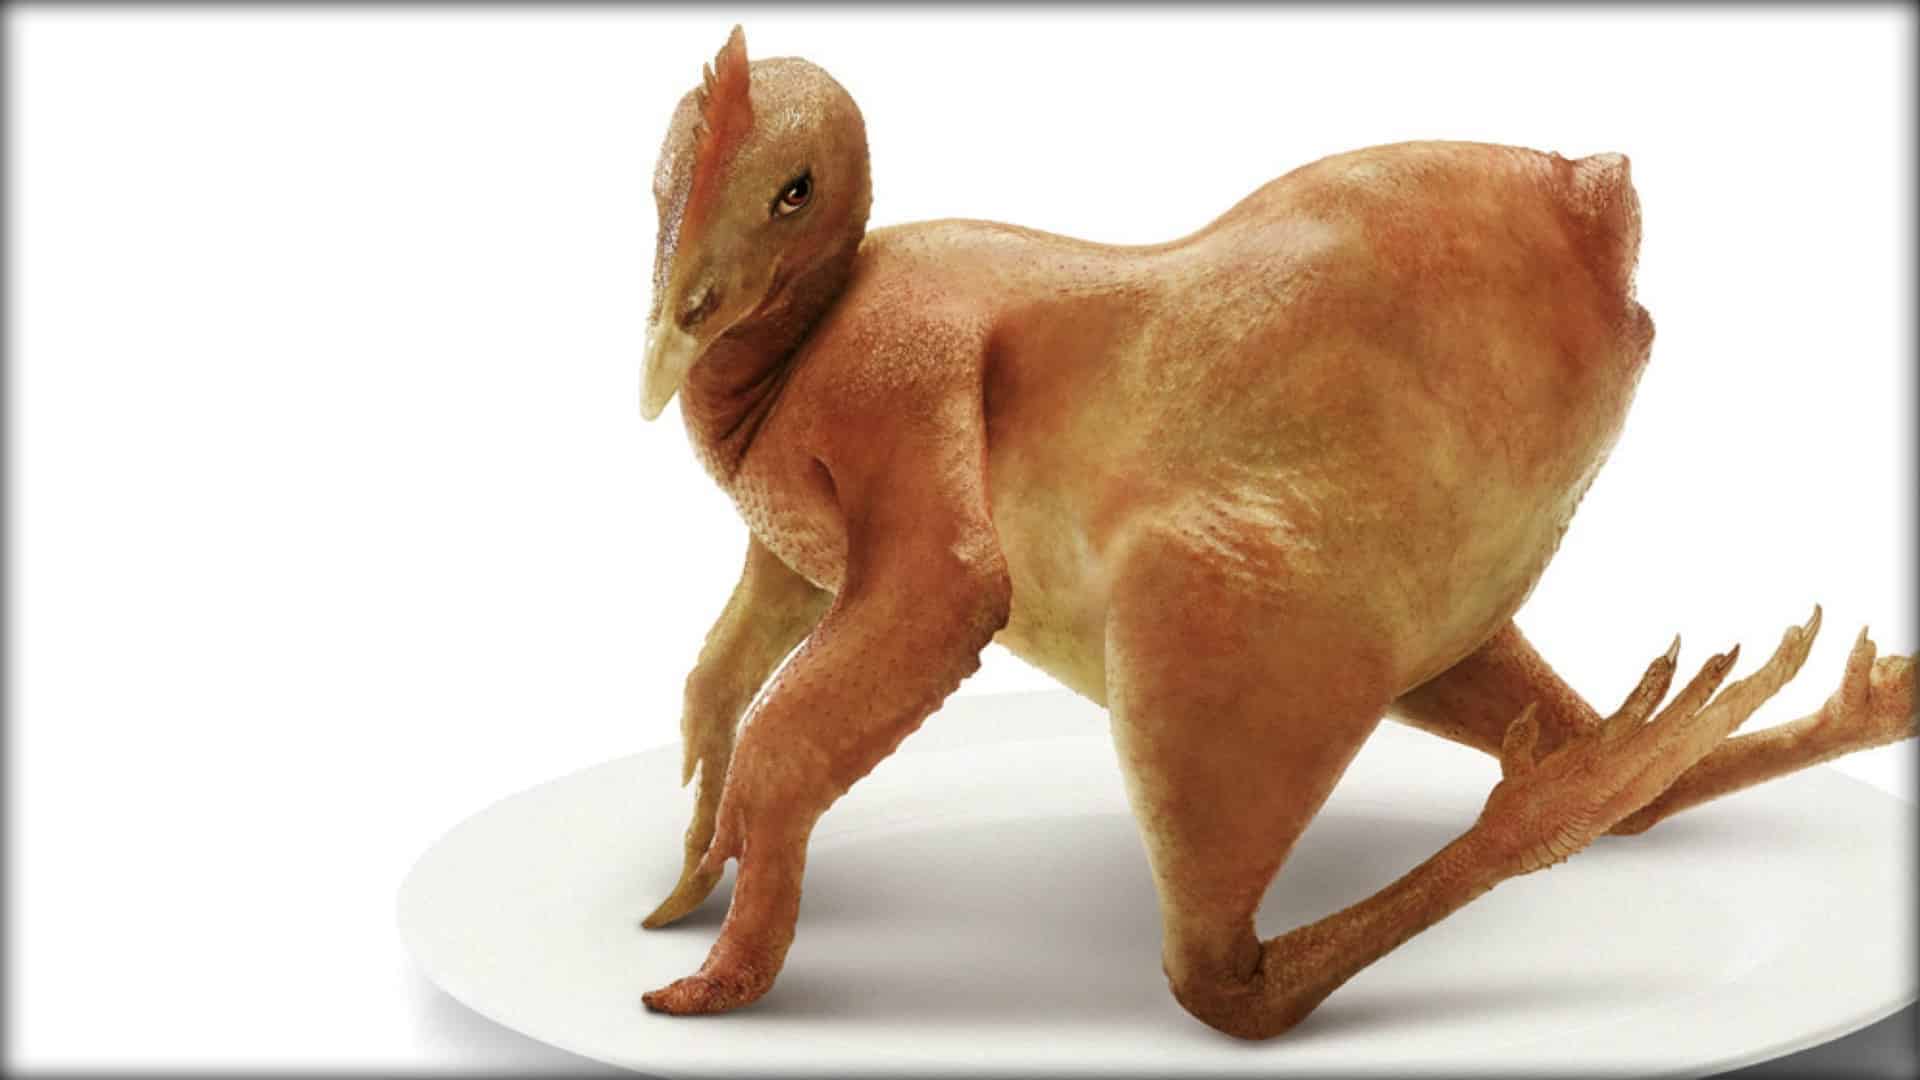 The image shows a whole, dead, chicken. Its feathers have been removed and it’s flesh roasted. It is posed in such a way that it might appear alluring.